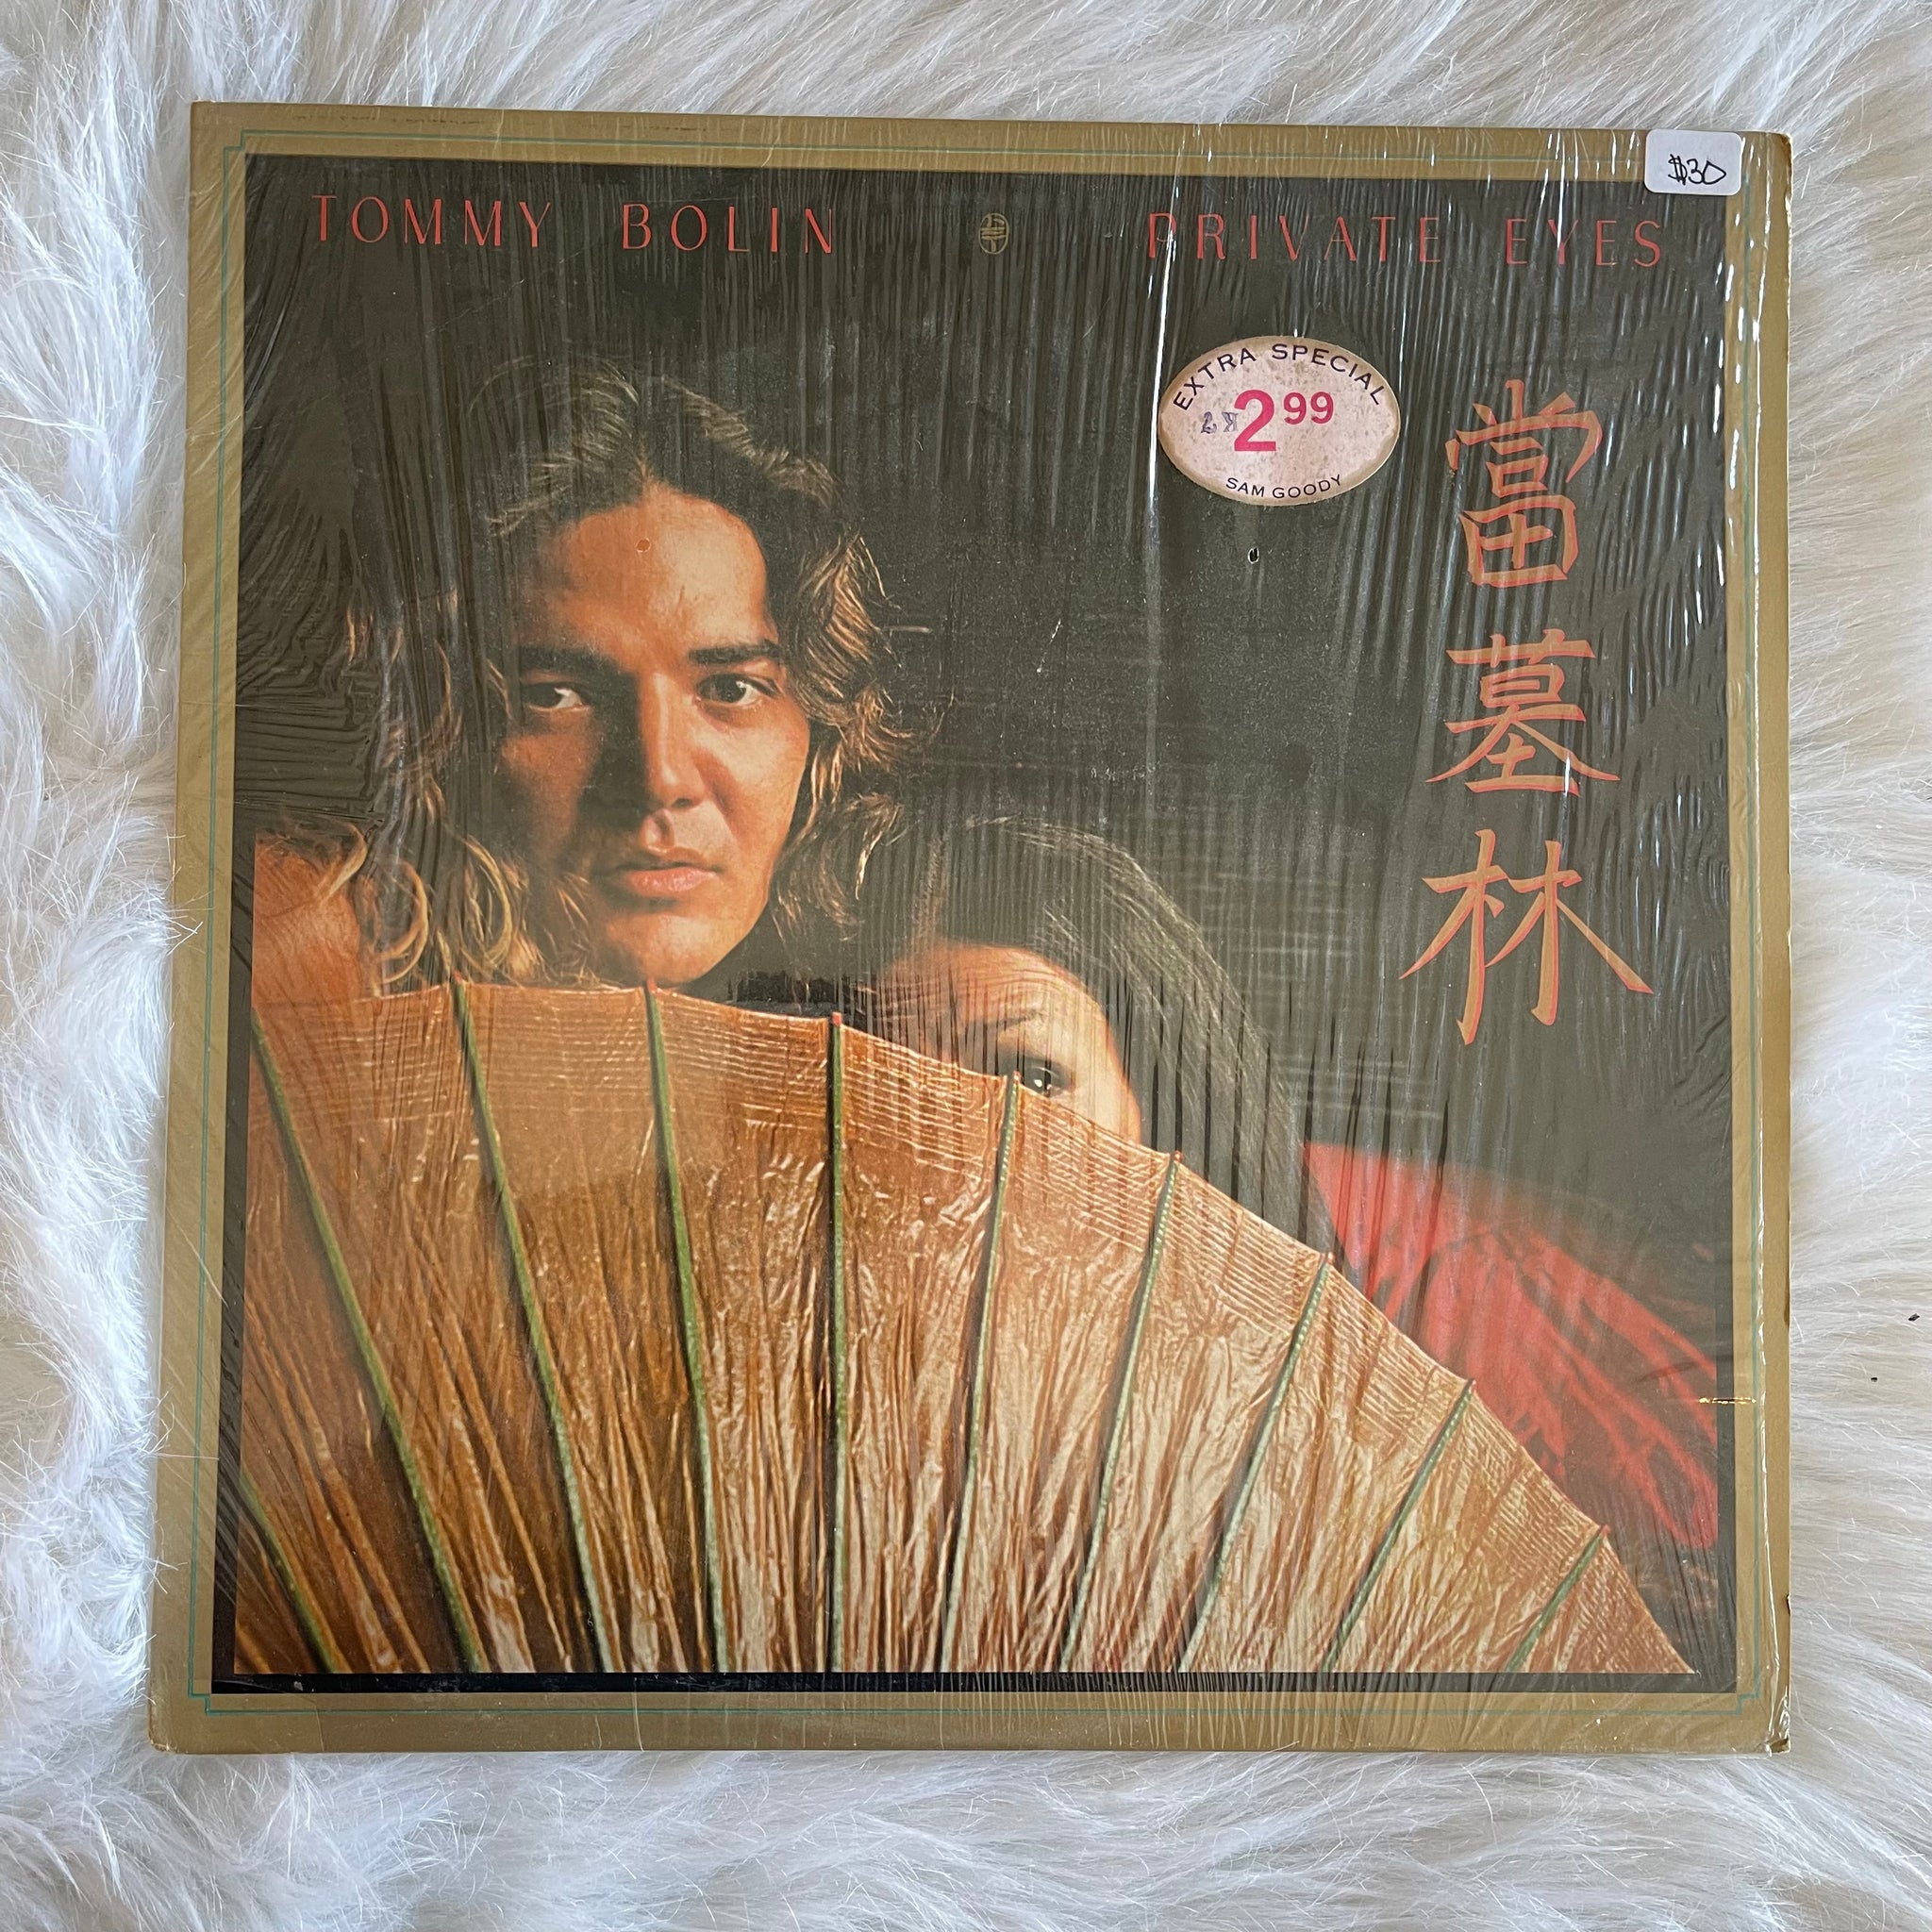 Tommy Bolin-Private Eyes